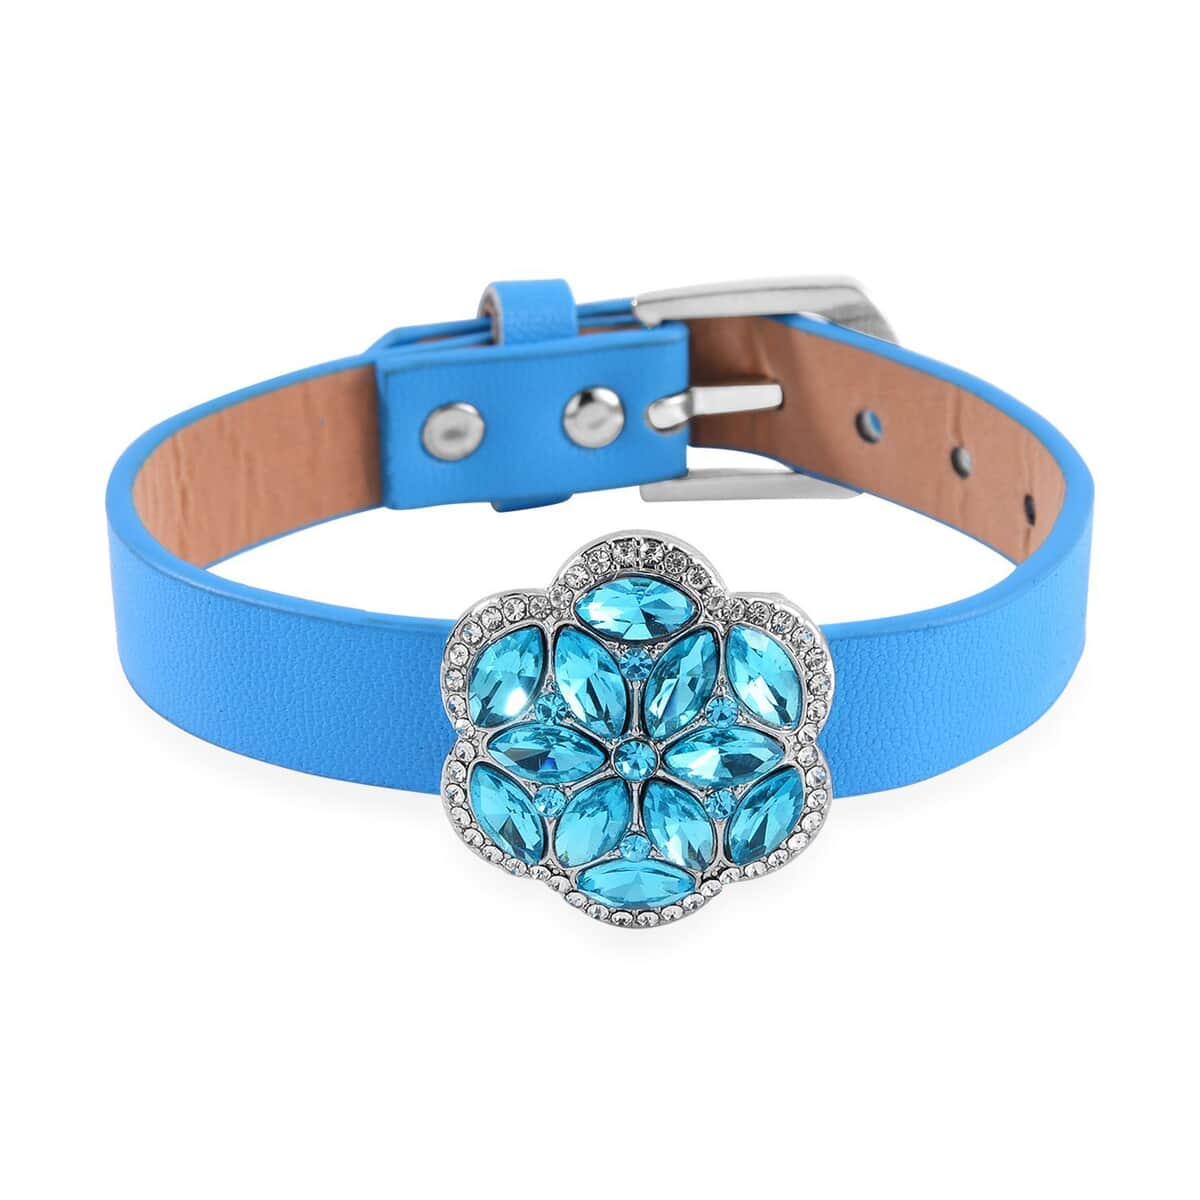 Sky Blue Color and White Austrian Crystal, Faux Leather Floral Bracelet (6-8In), Earrings, Ring (Size 9.0) and Pendant Necklace 20-22 Inches In Silvertone image number 3